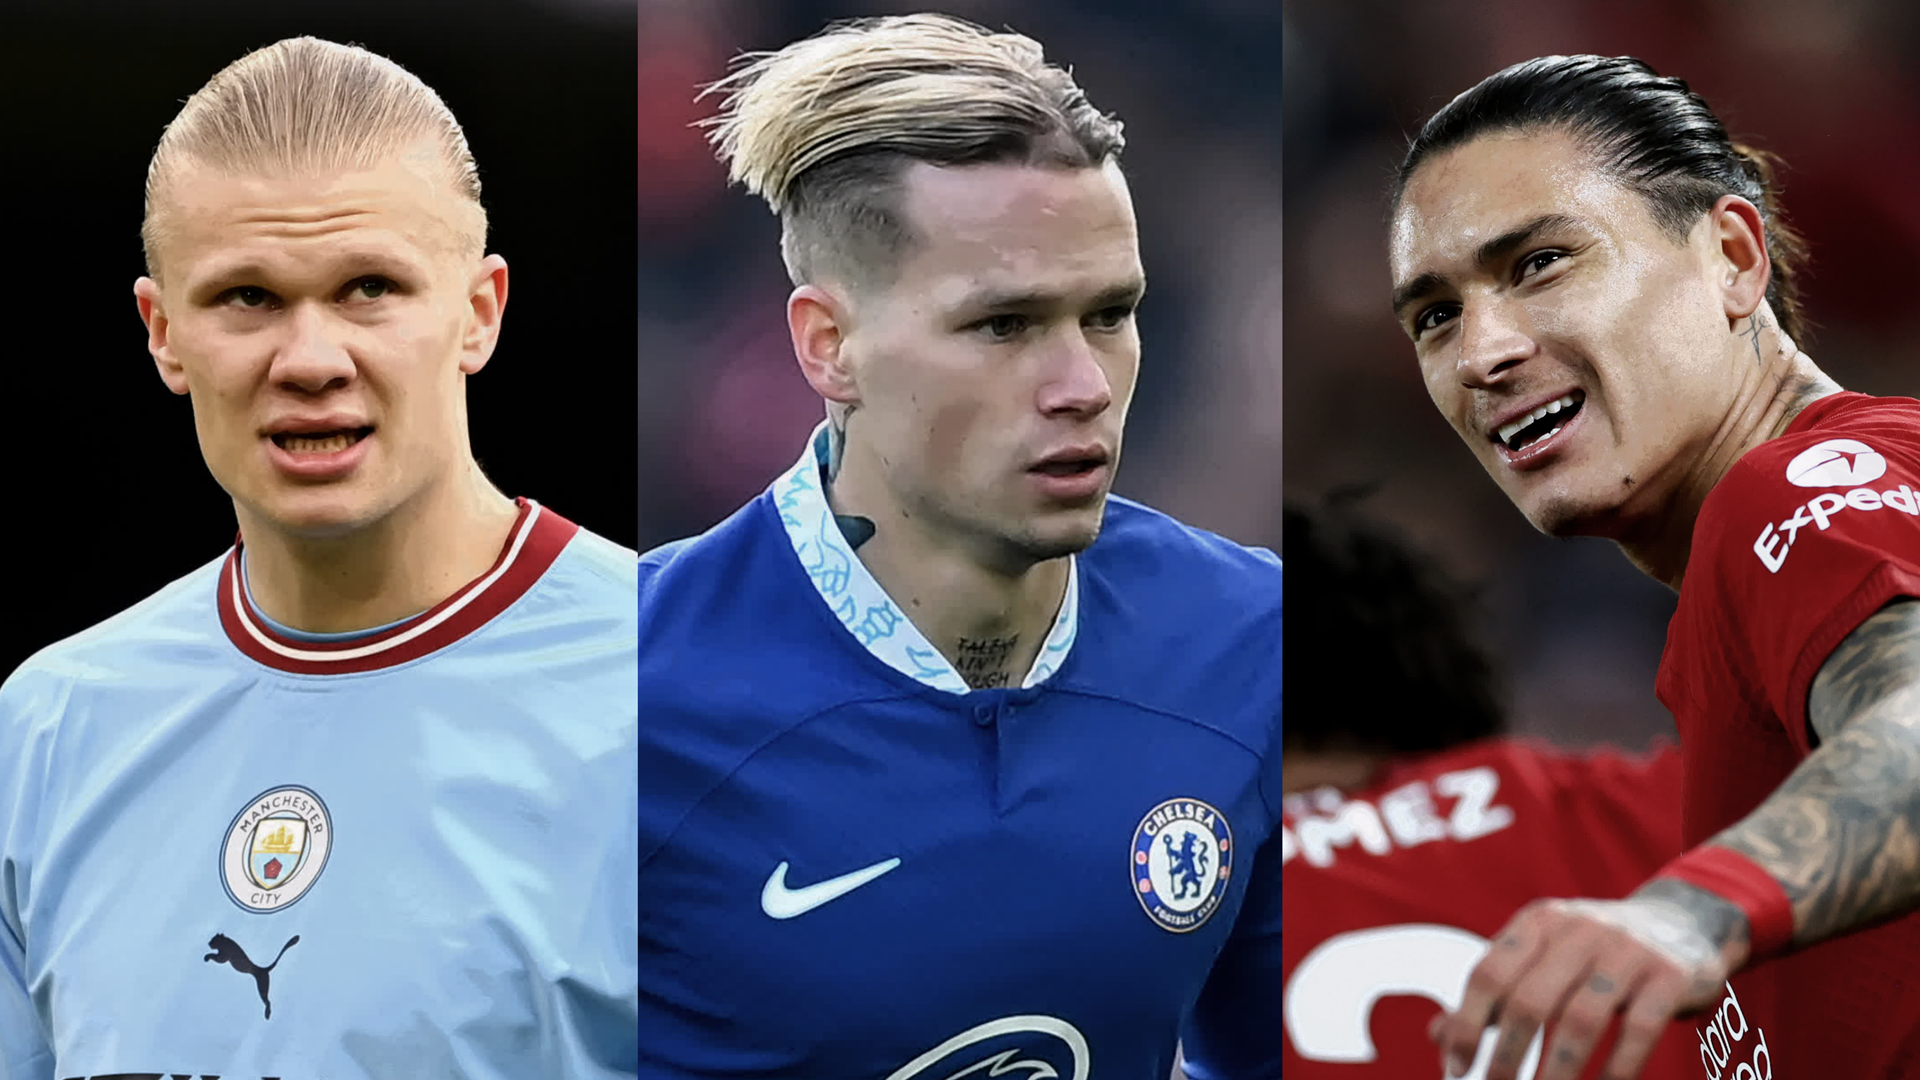 Who is the fastest player in the Premier League? Goal